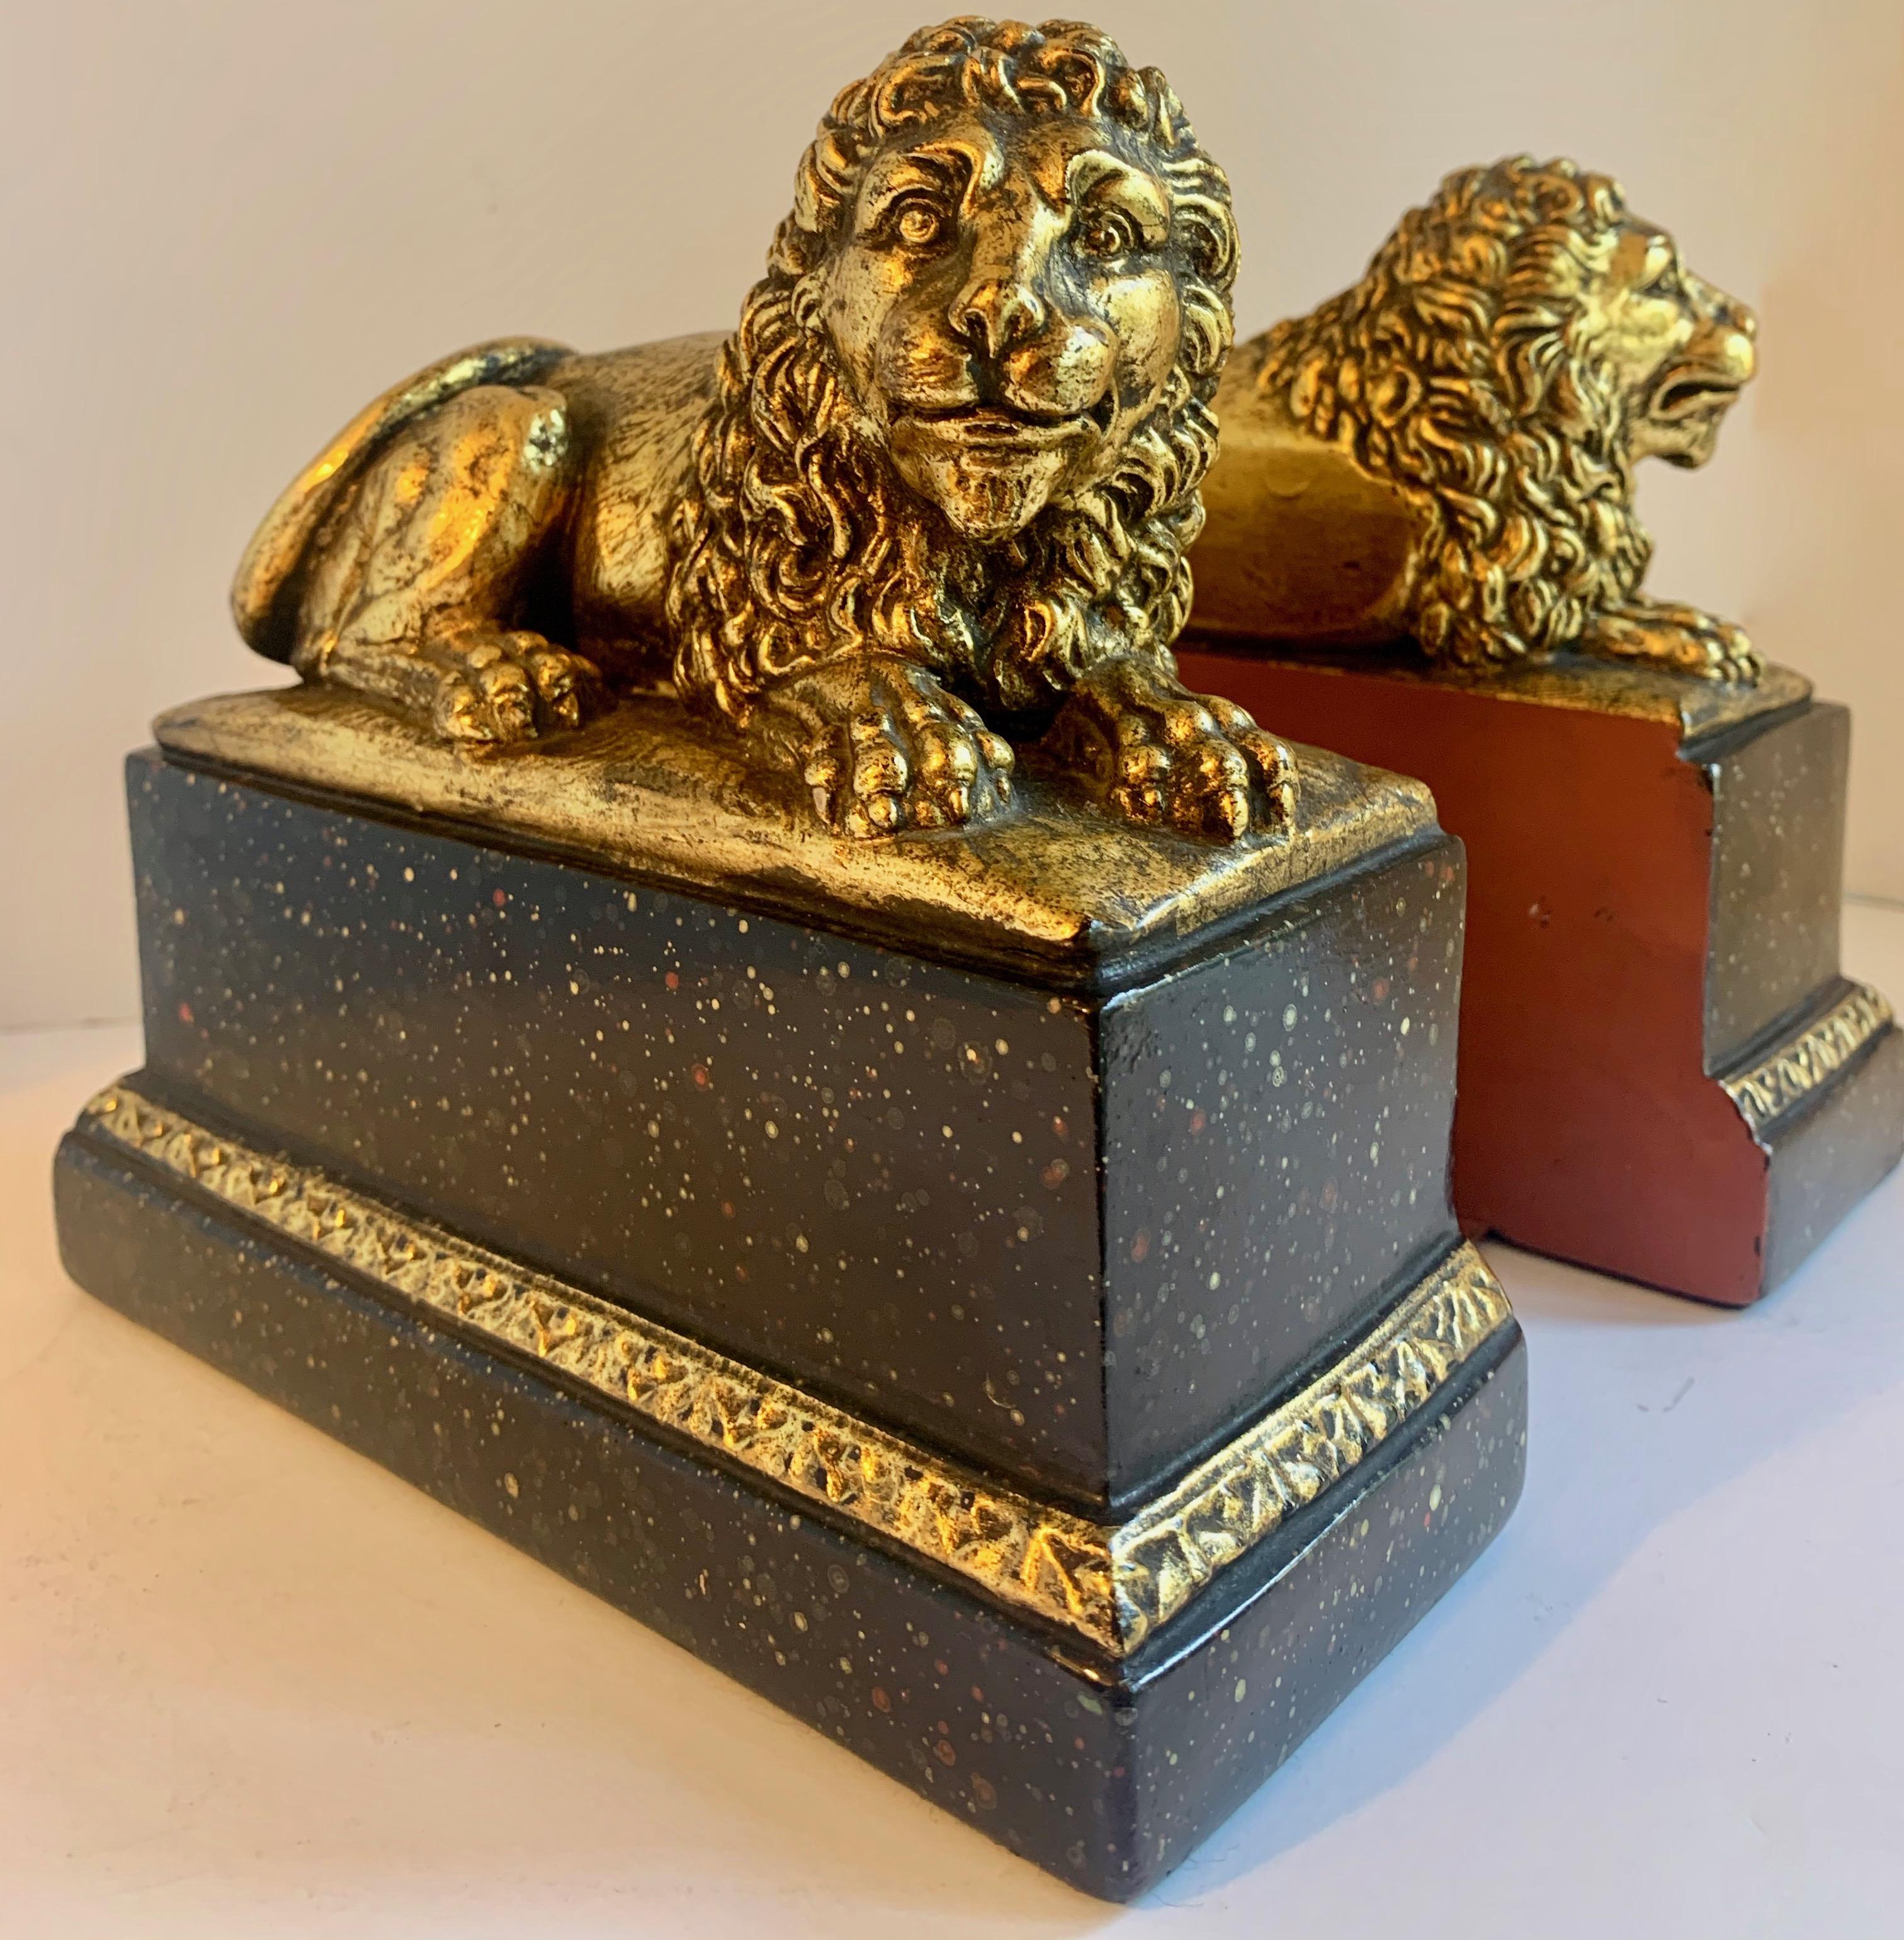 Stunning pair of gilt lions on a black base - most likely Borghese with the traditional red back with the flat support for books - very decorative and eye catching - a perfect compliment to many desks / libraries. A wonderful pair.